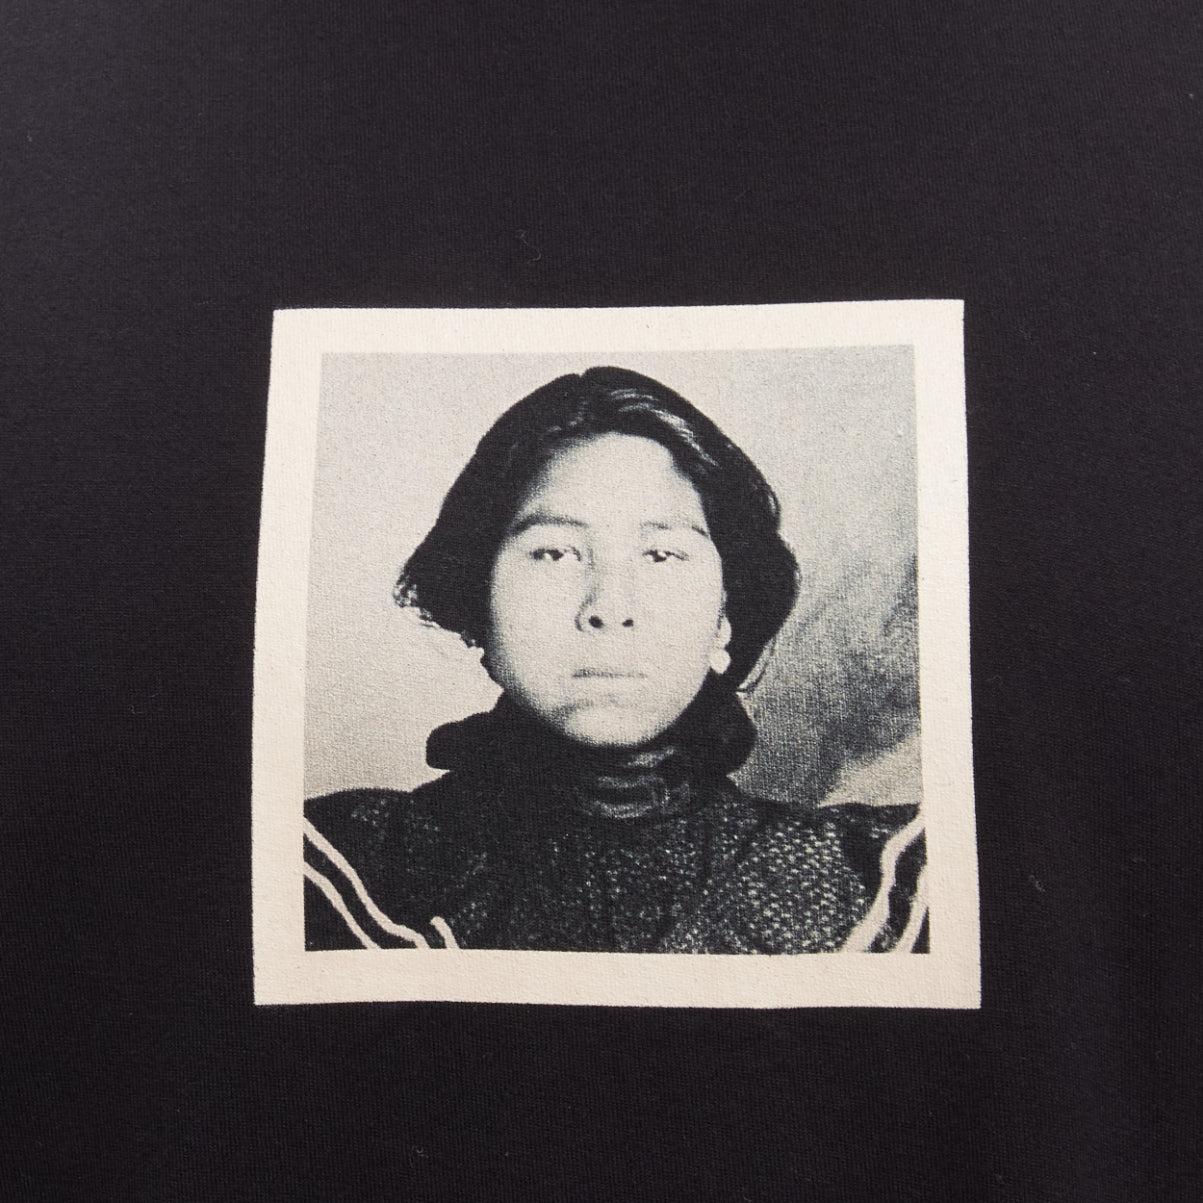 GIVENCHY black cotton women portrait print crew neck tshirt M
Reference: JSLE/A00029
Brand: Givenchy
Designer: Riccardo Tisci
Material: Cotton
Color: Black
Pattern: Solid
Closure: Pullover
Extra Details: Givenchy signature cross stitch at back.
Made